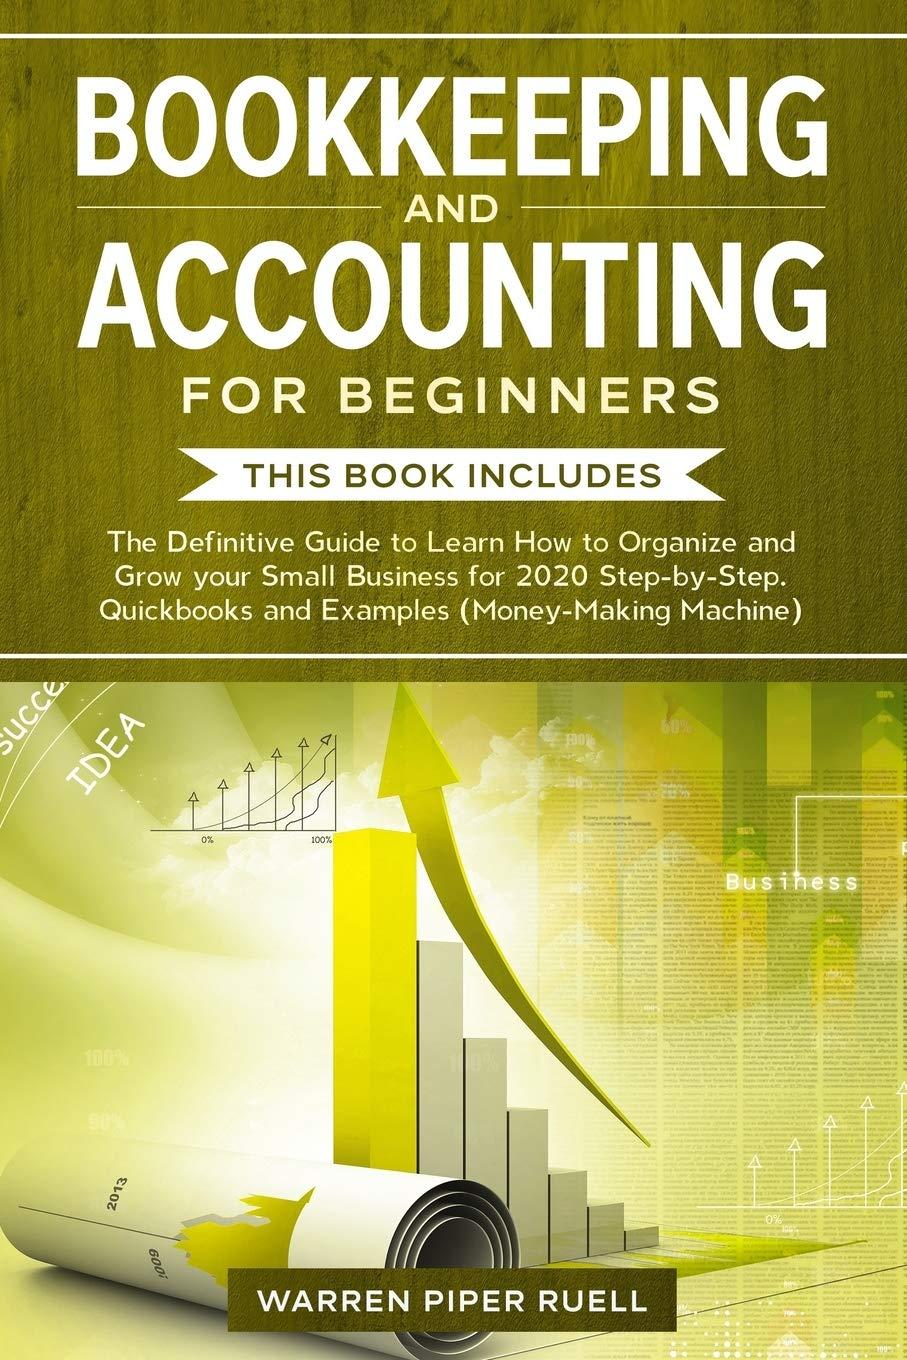 bookkeeping and accounting for beginners 1st edition warren piper ruell 1654626090, 978-1654626099